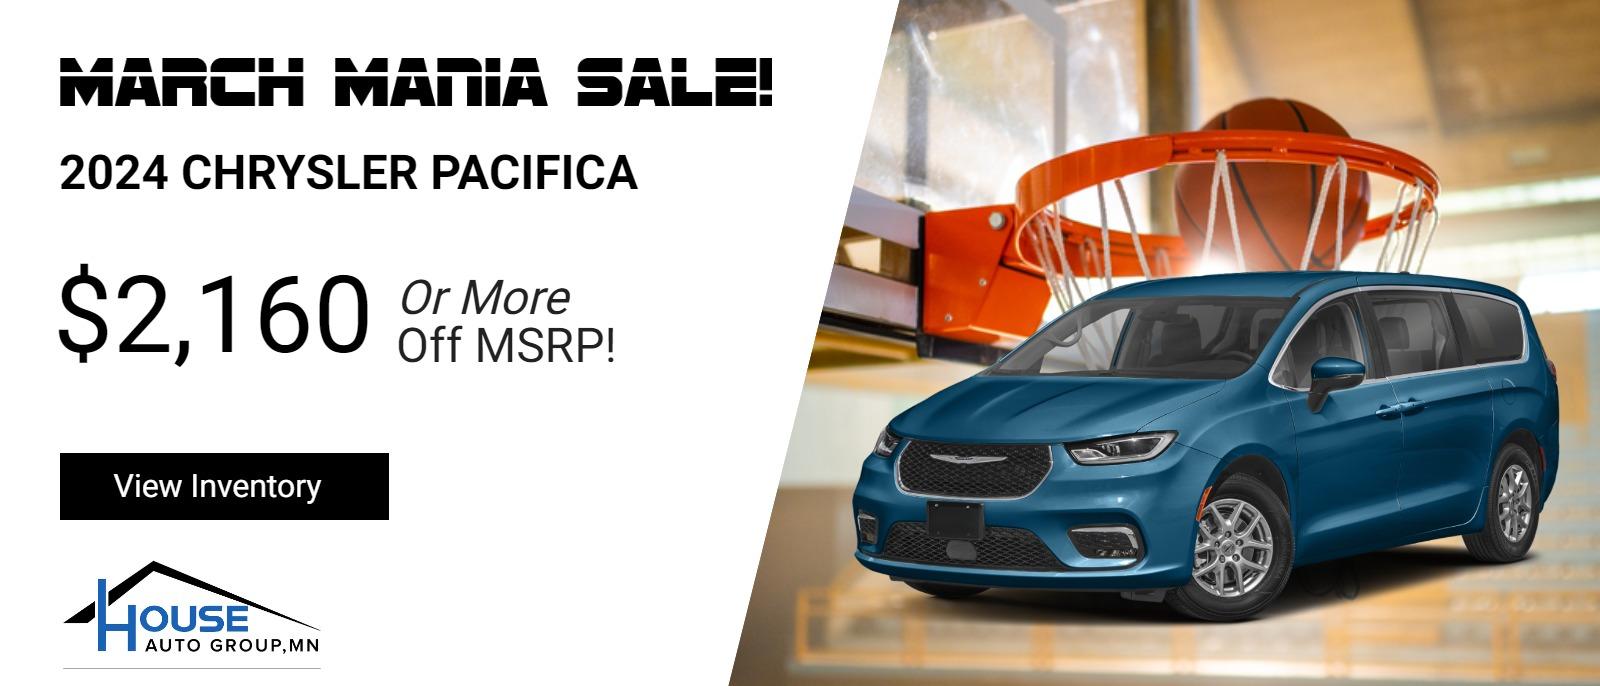 2024 Chrysler Pacifica - $2,160 Or More Off MSRP!